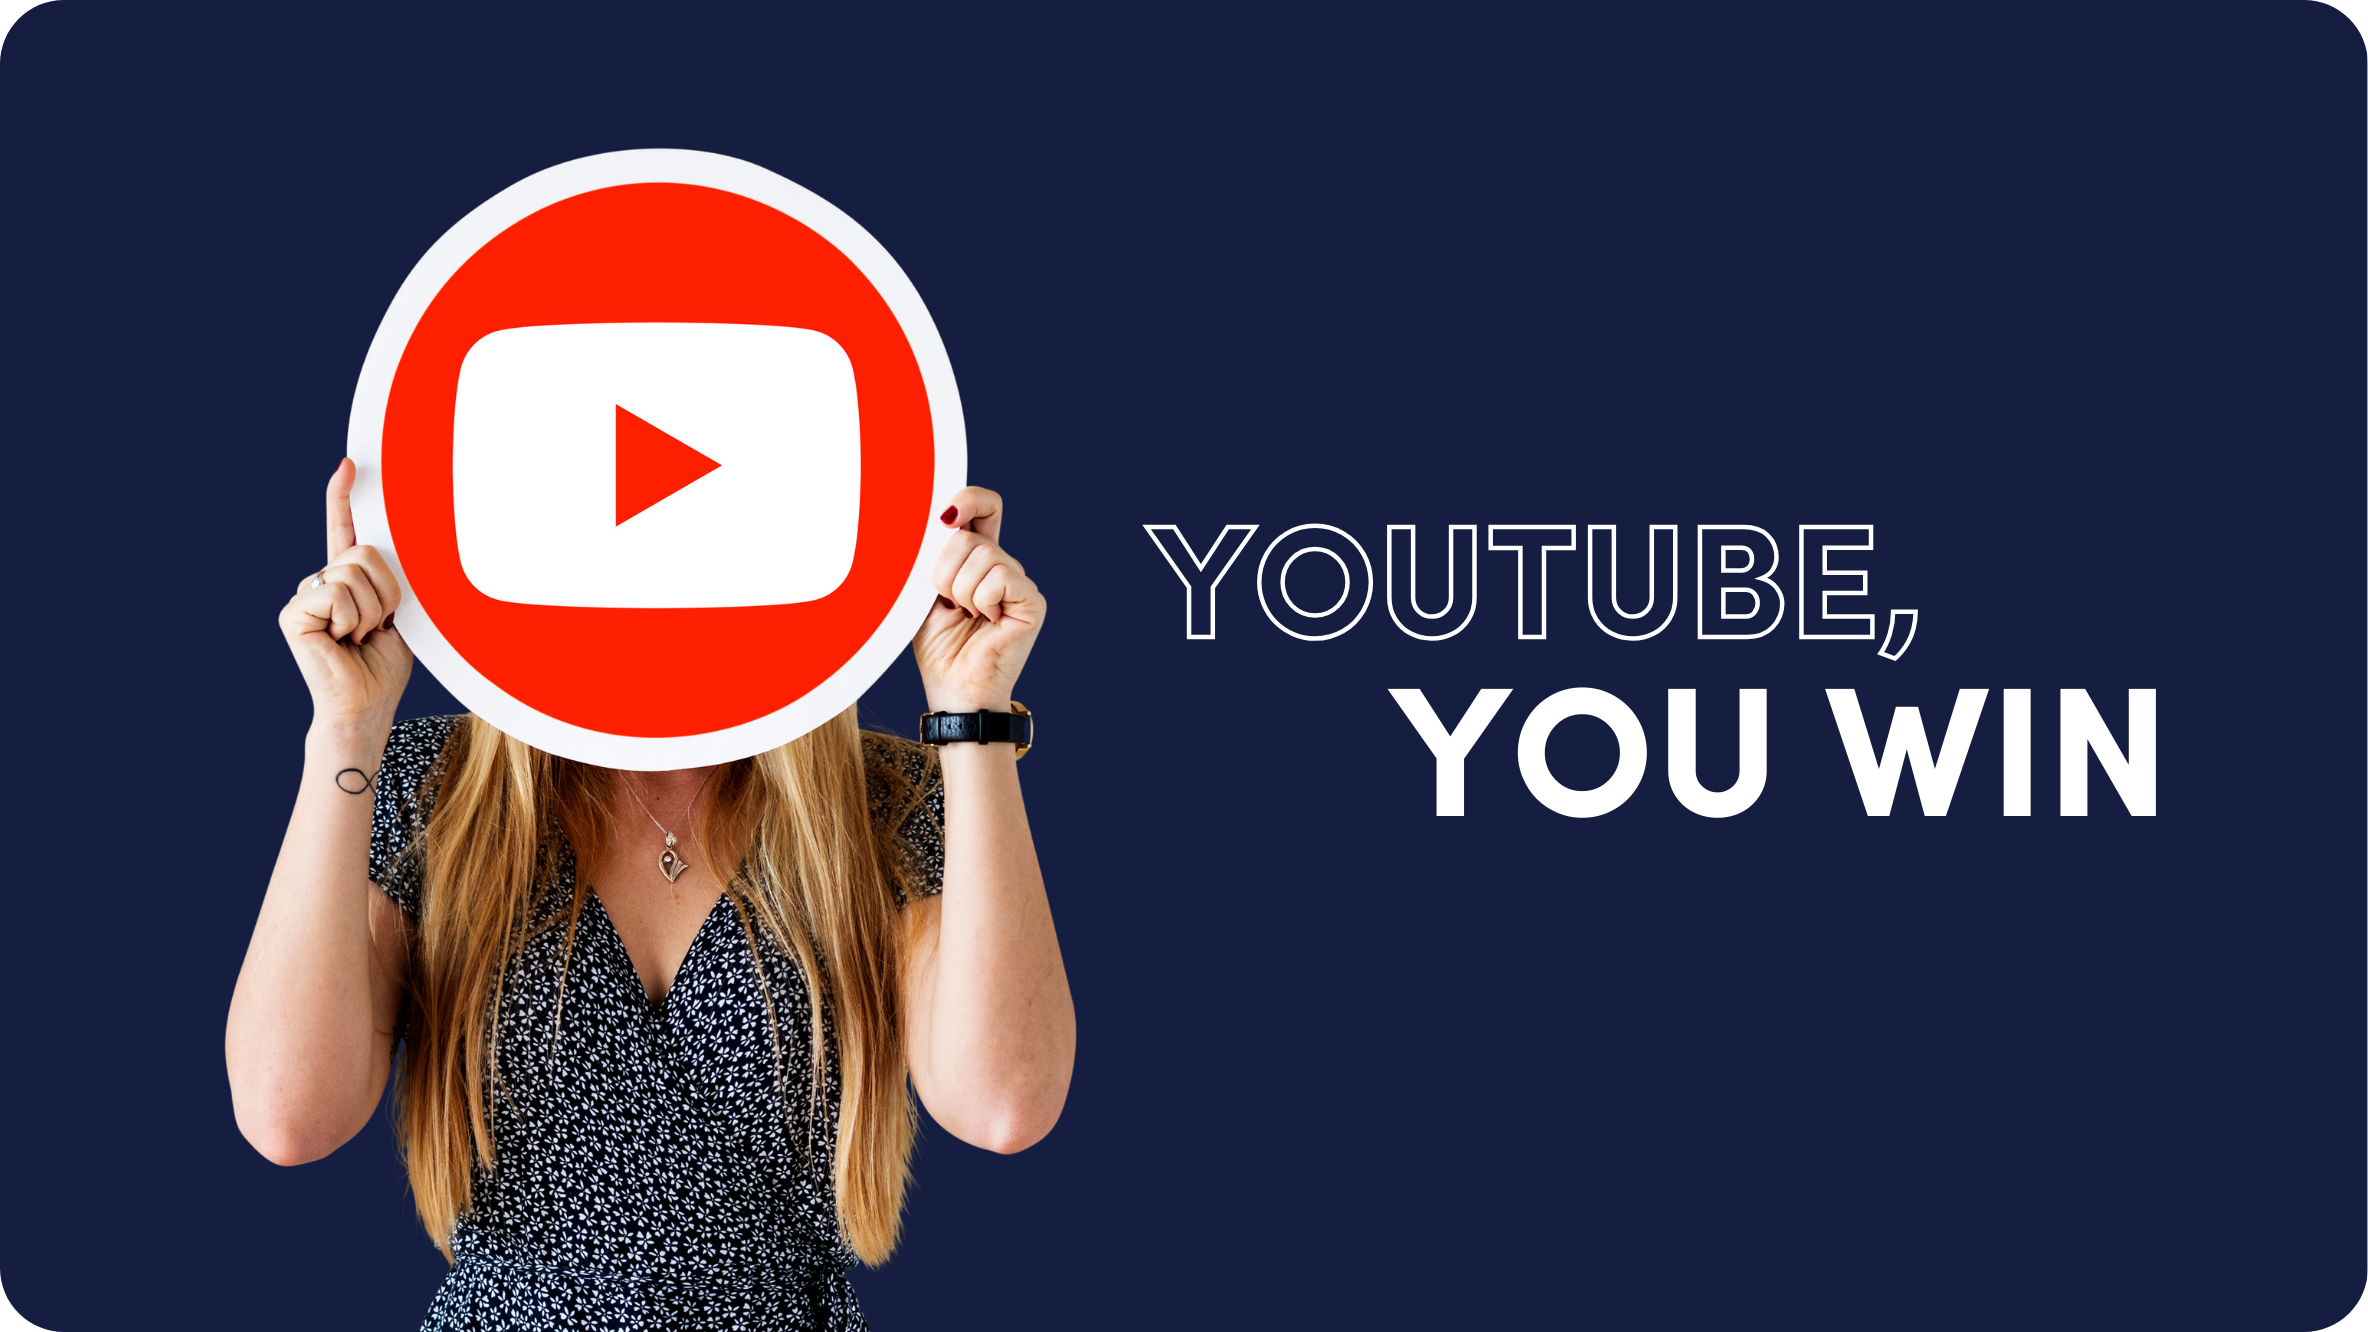 11 Advanced Tactics for Promoting Your YouTube Channel